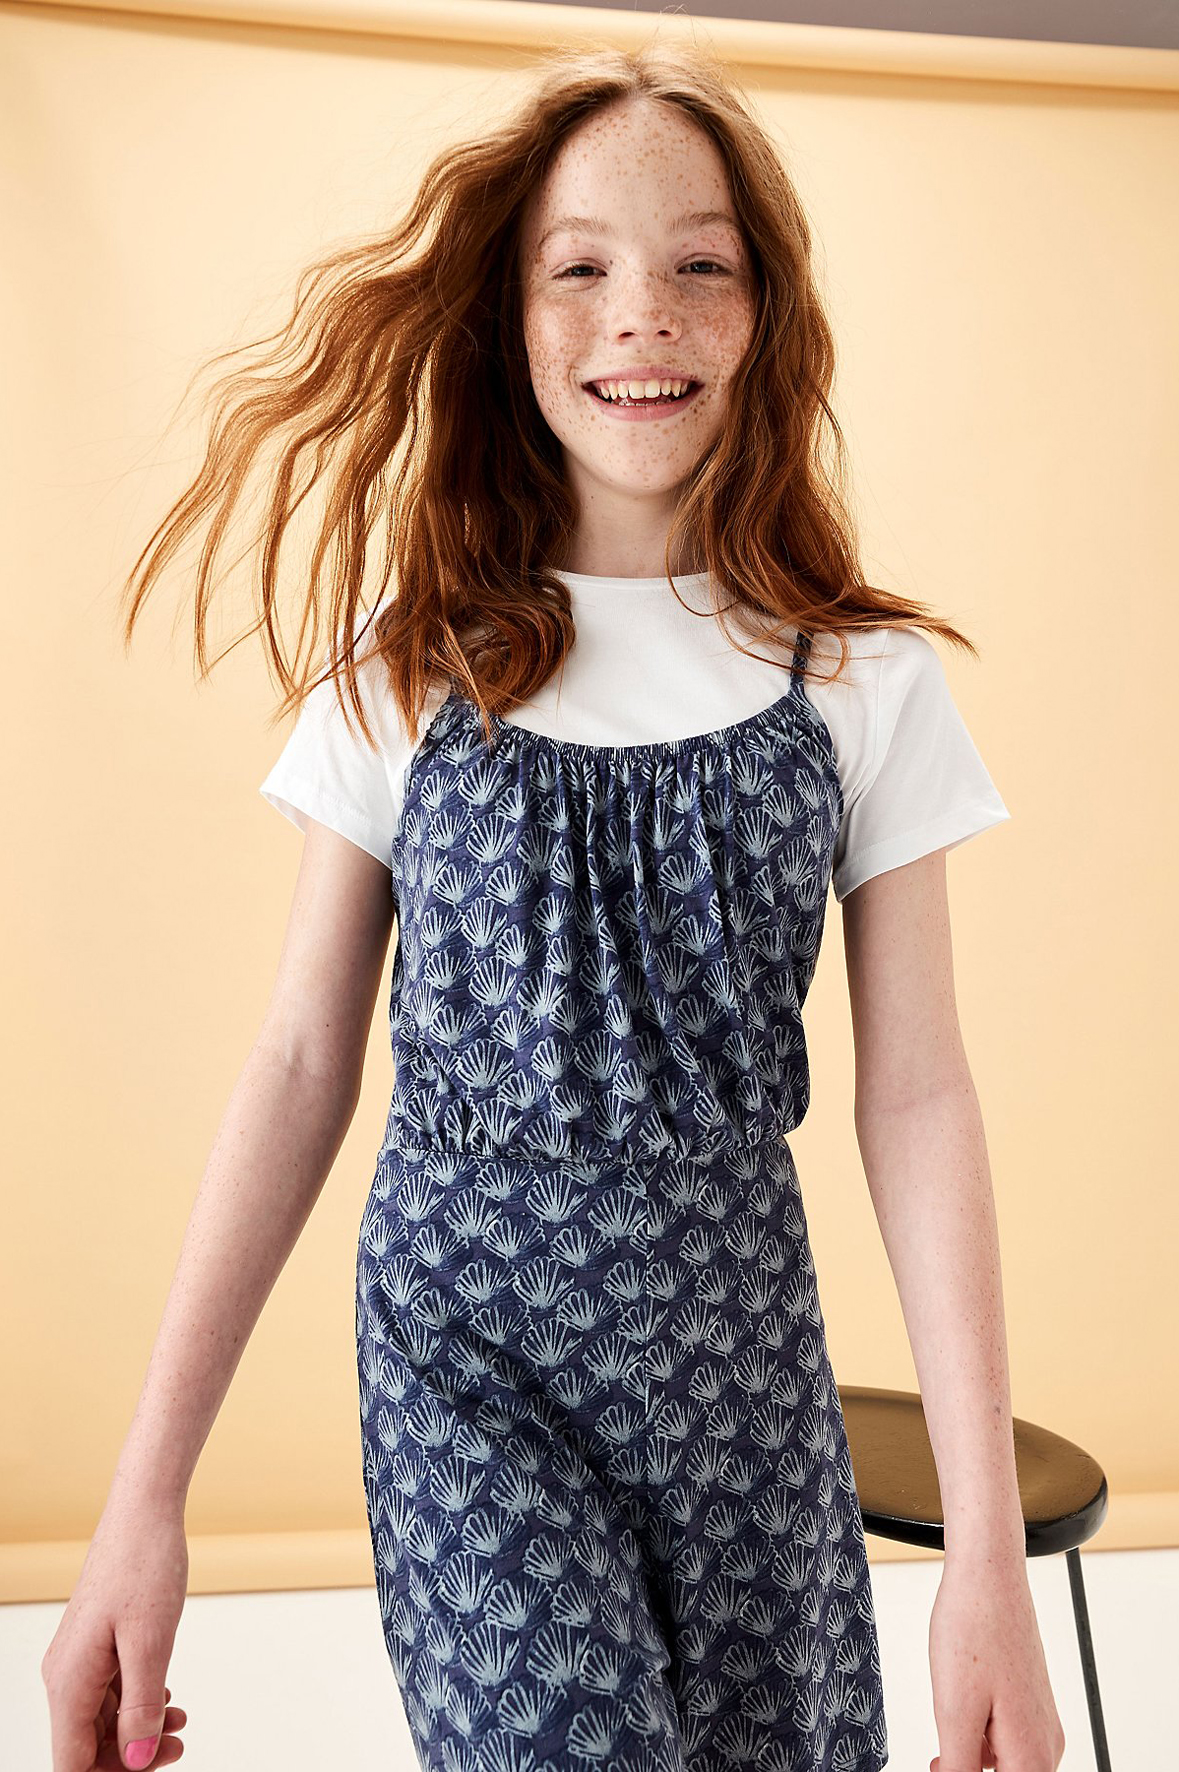 Emily for George Asda – Bruce and Brown